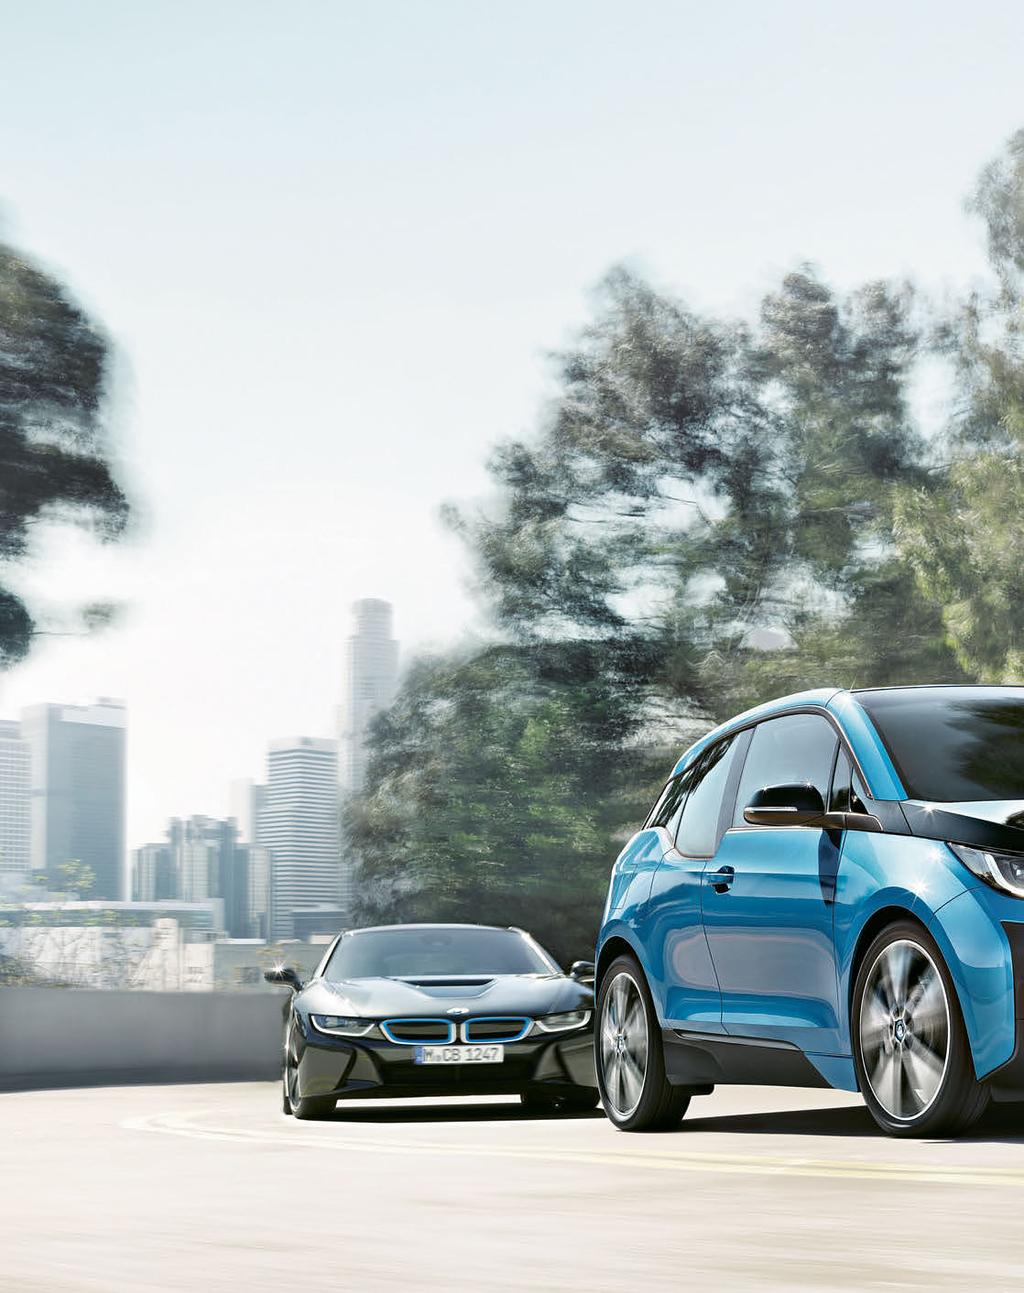 WHEN YOU MOVE FIRST THE WORLD MOVES WITH YOU. BMW i. THE BMW i3 04 05 The world never stops moving. We keep moving.